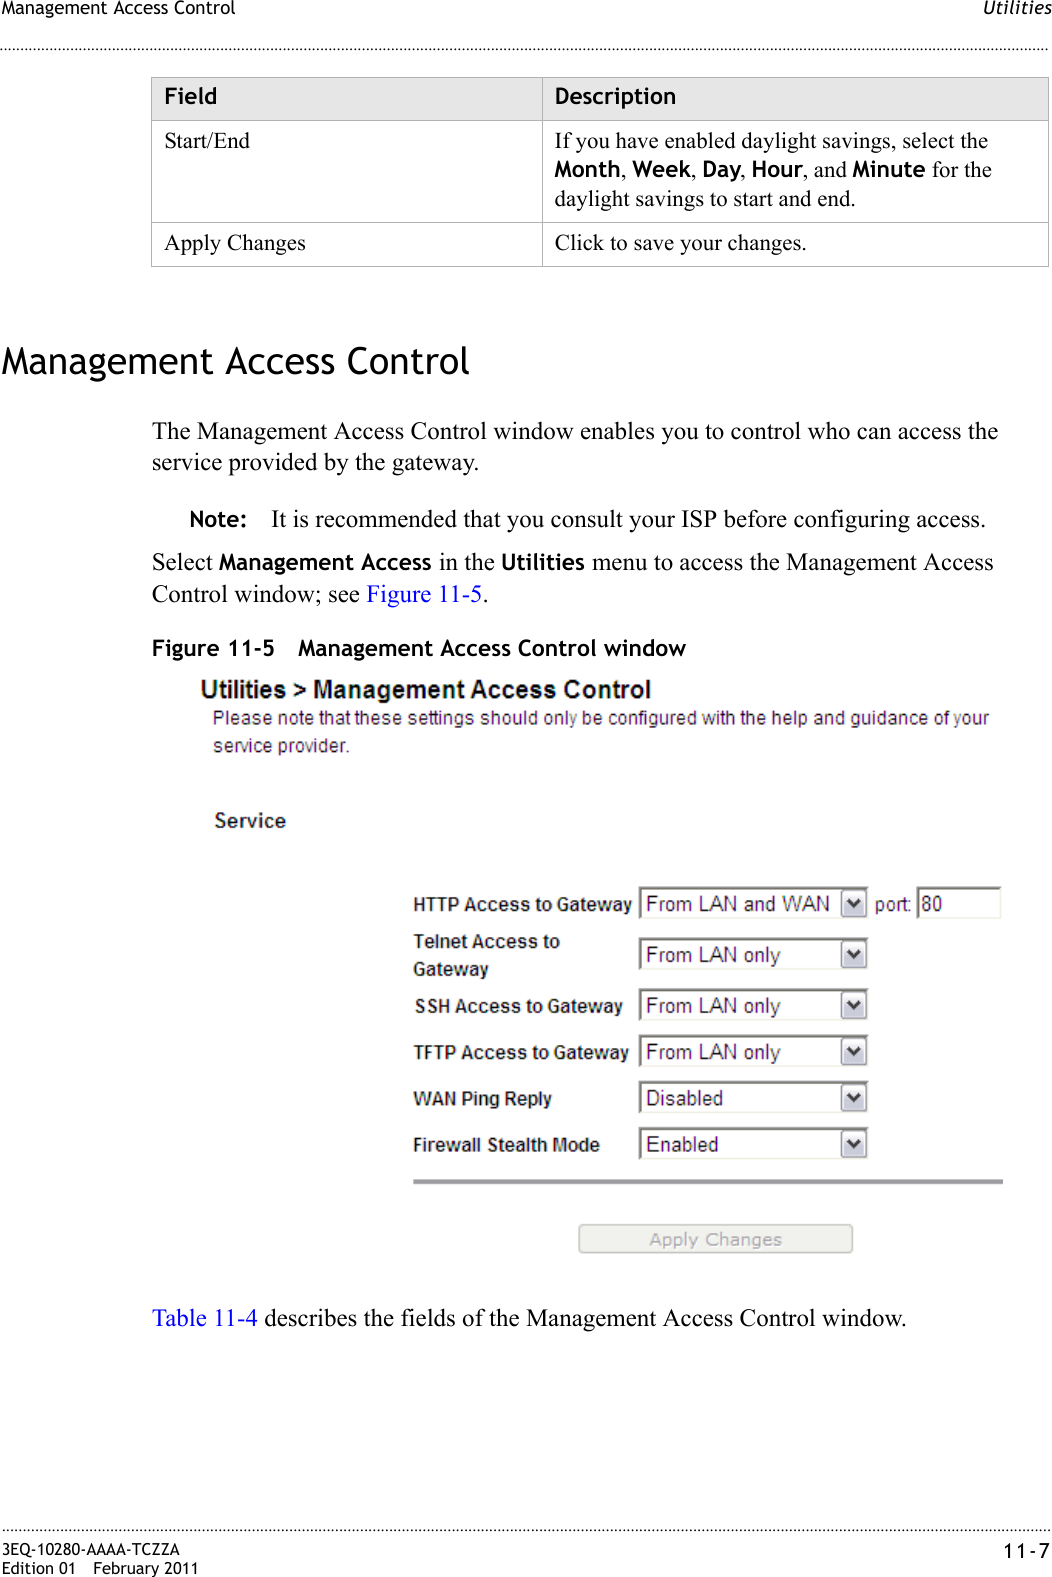 UtilitiesManagement Access Control............................................................................................................................................................................................................................................................3EQ-10280-AAAA-TCZZAEdition 01 February 2011 11-7............................................................................................................................................................................................................................................................Management Access ControlThe Management Access Control window enables you to control who can access the service provided by the gateway.Note: It is recommended that you consult your ISP before configuring access.Select Management Access in the Utilities menu to access the Management Access Control window; see Figure 11-5.Figure 11-5 Management Access Control windowTable 11-4 describes the fields of the Management Access Control window.Start/End If you have enabled daylight savings, select the Month, Week, Day, Hour, and Minute for the daylight savings to start and end.Apply Changes Click to save your changes.Field Description